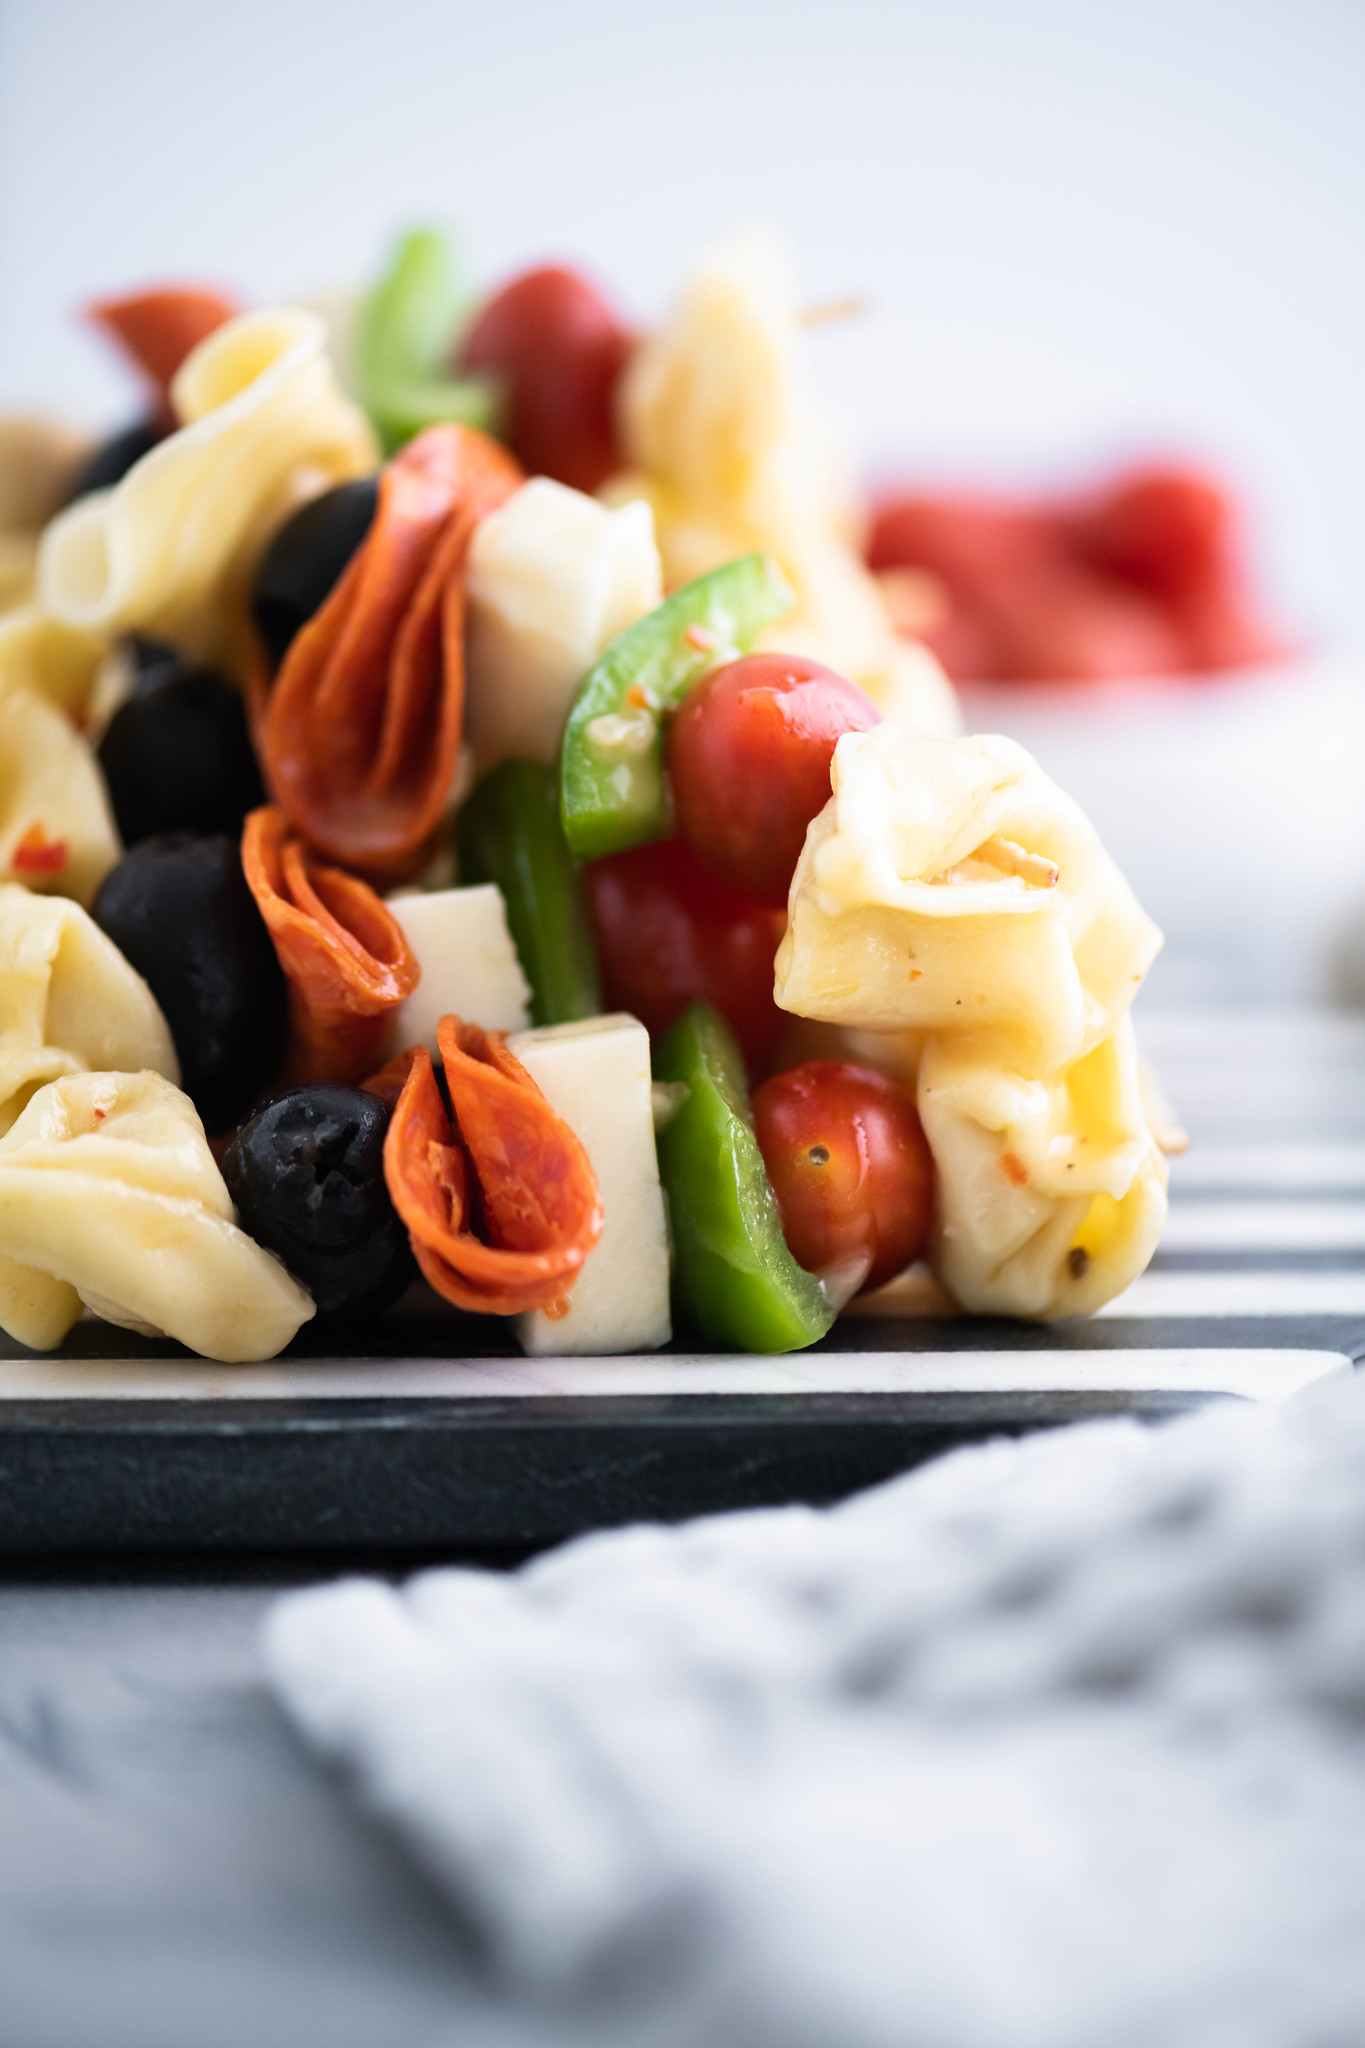 Looking for a fun appetizer or creative lunch box addition? Pasta Salad on a Stick takes all the classic pasta salad ingredients and threads them on a long toothpick for a delicious new spin. Perfect for parties and afternoon snacks alike.